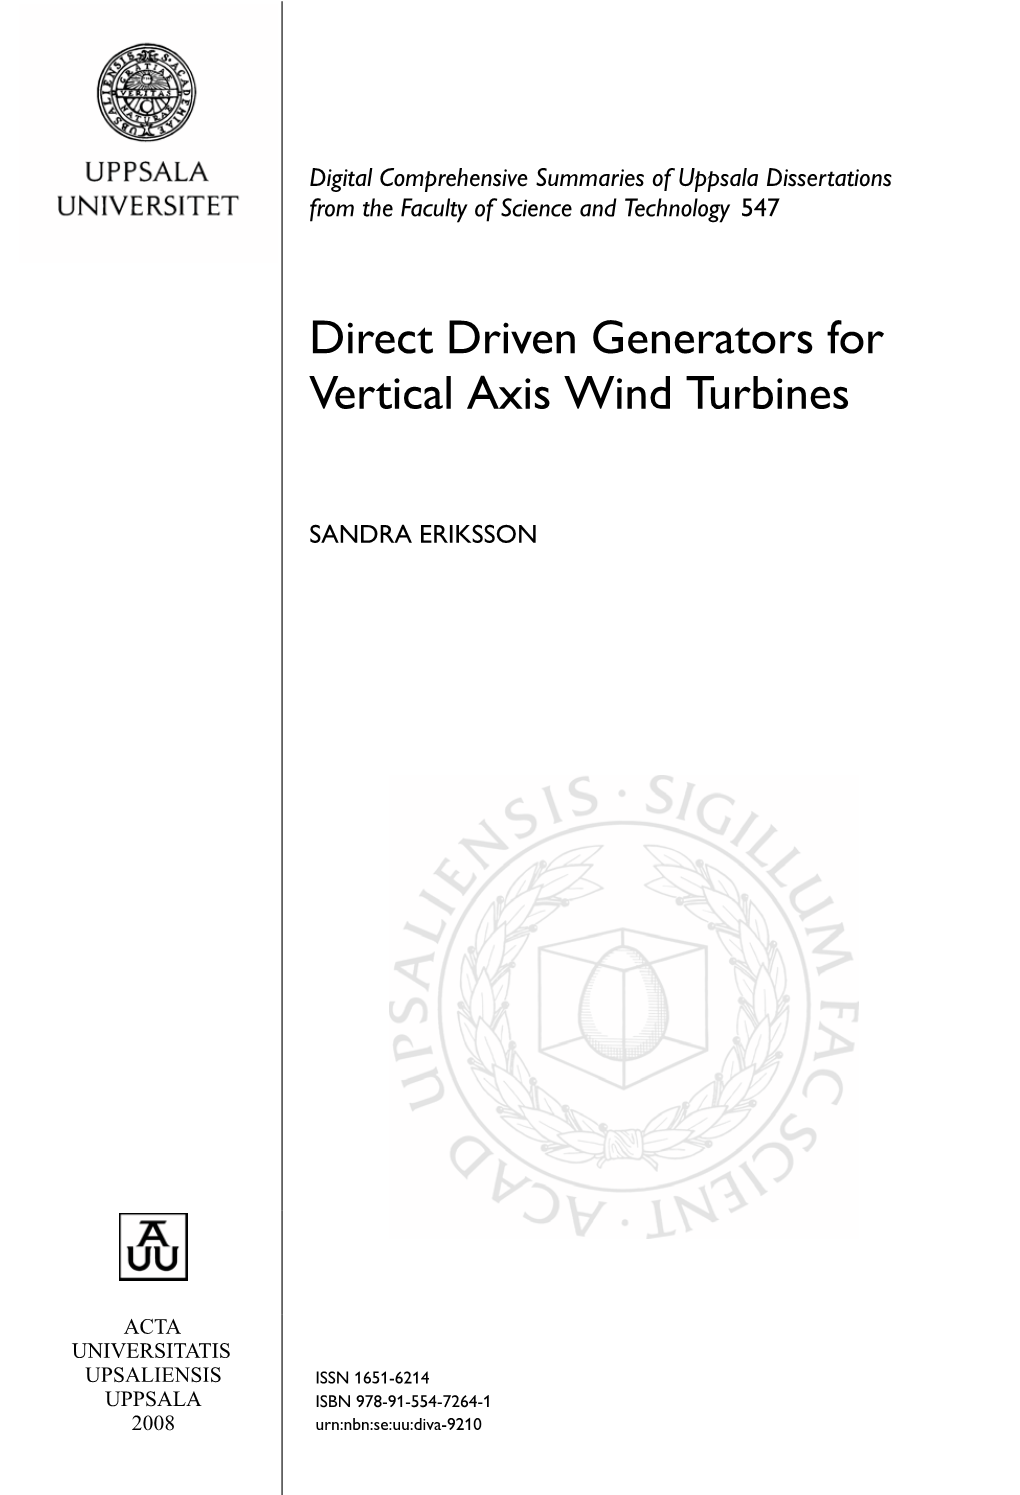 Direct Driven Generators for Vertical Axis Wind Turbines